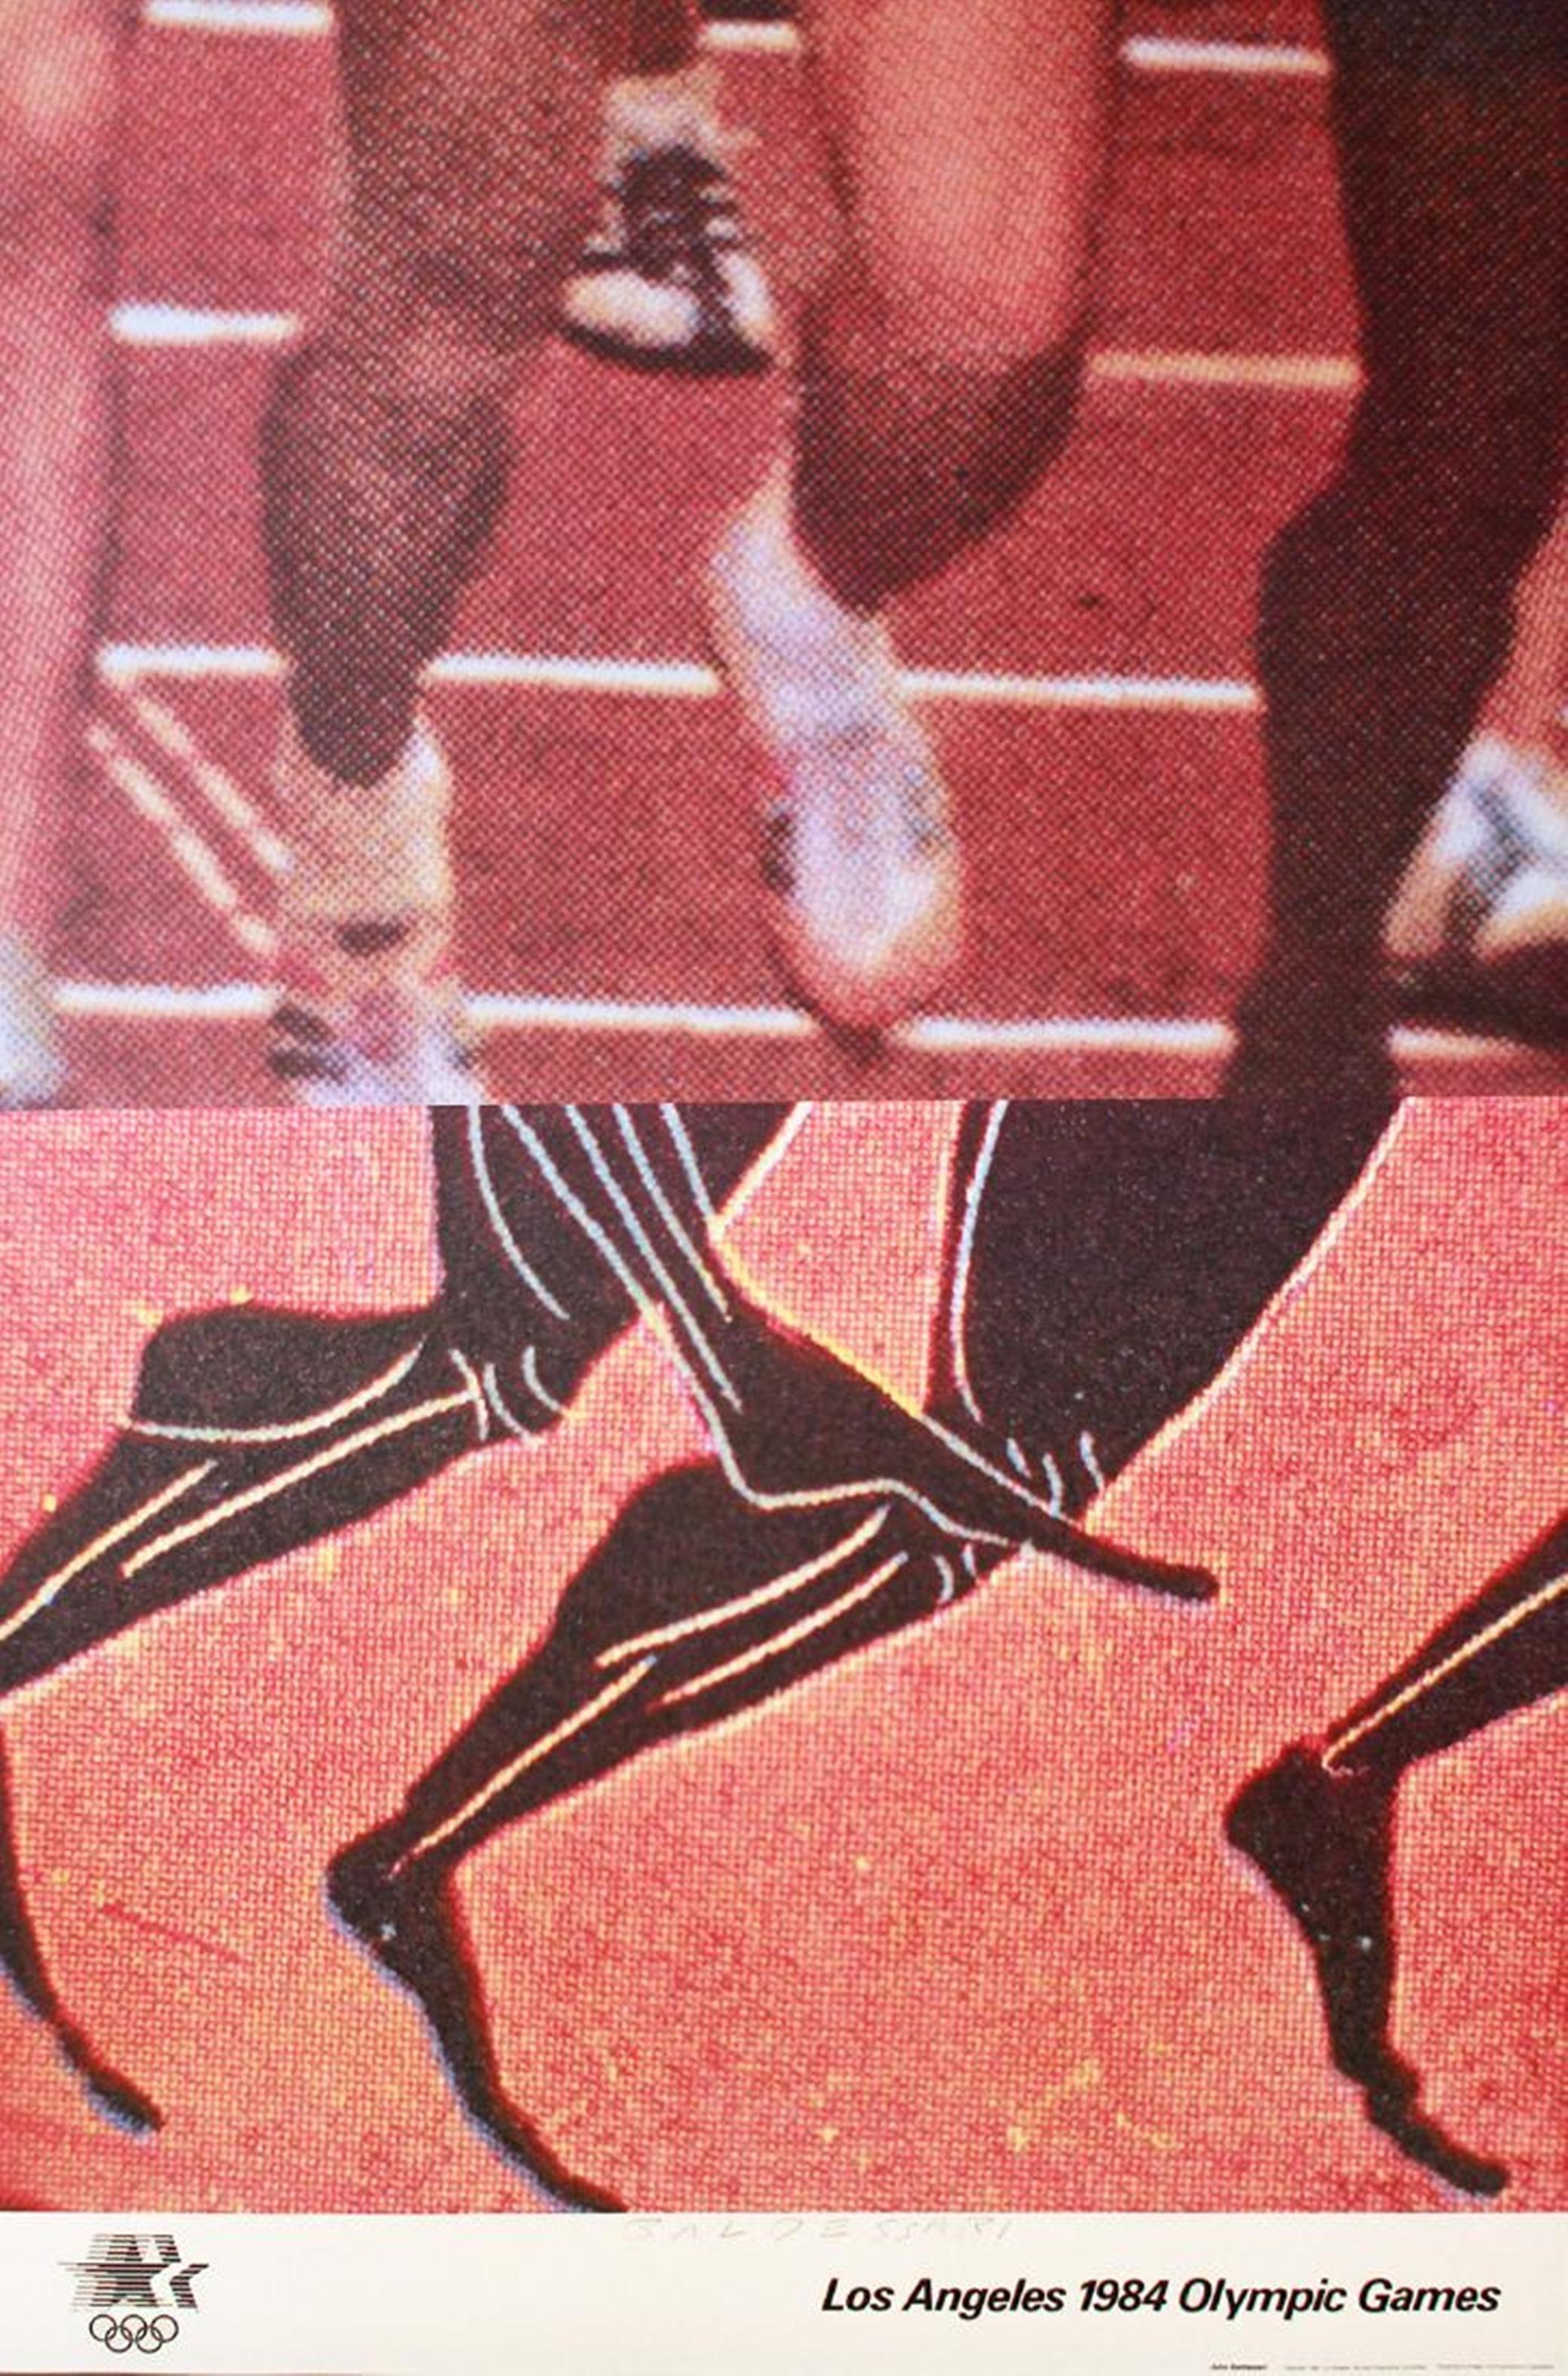 John Baldessari Figurative Print - The Sprinters, for the 1984 Los Angeles Olympics, with official COA